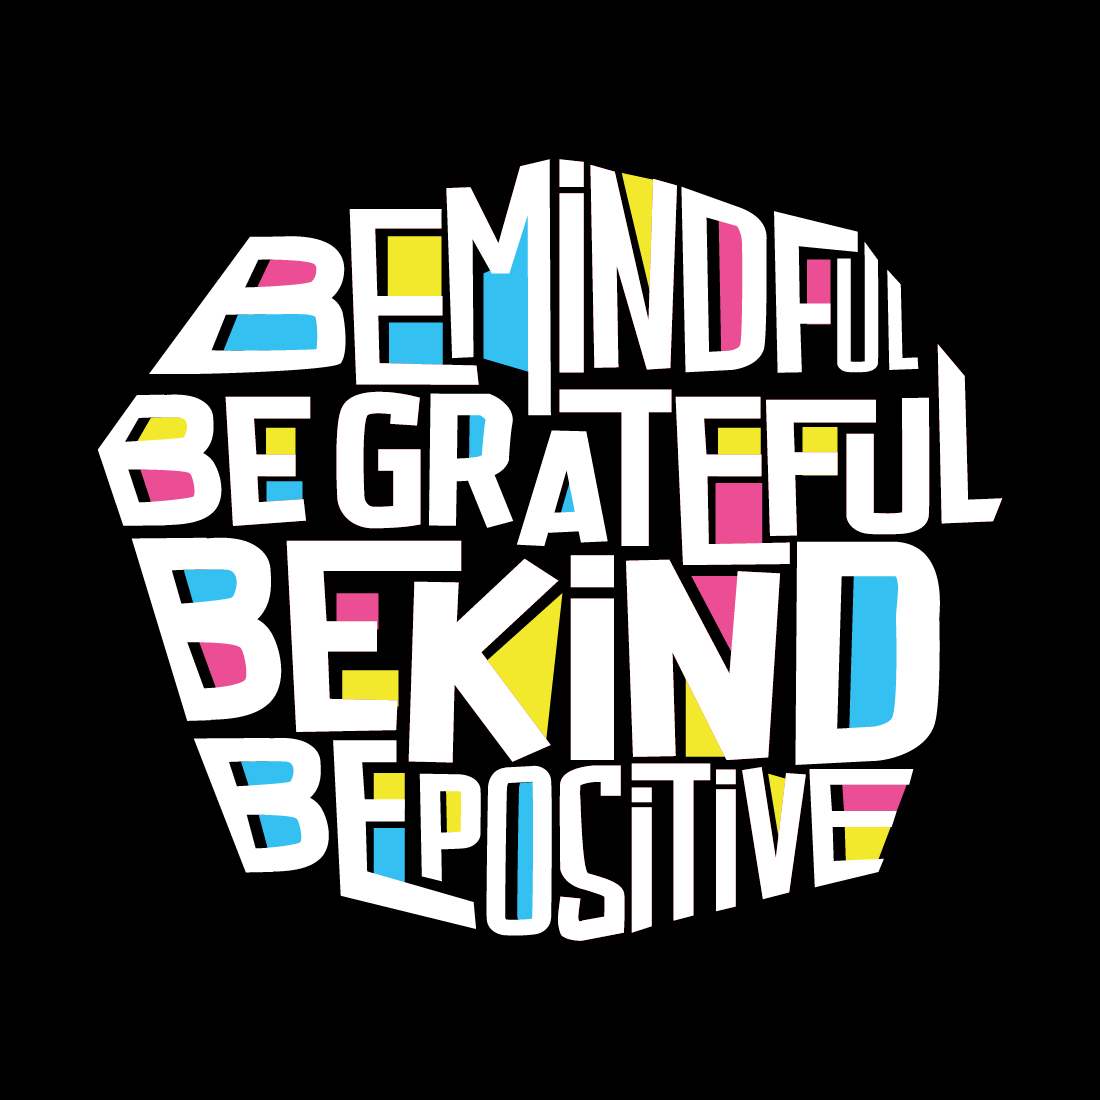 Black background with the words be mindful be grateful be kind of positive.